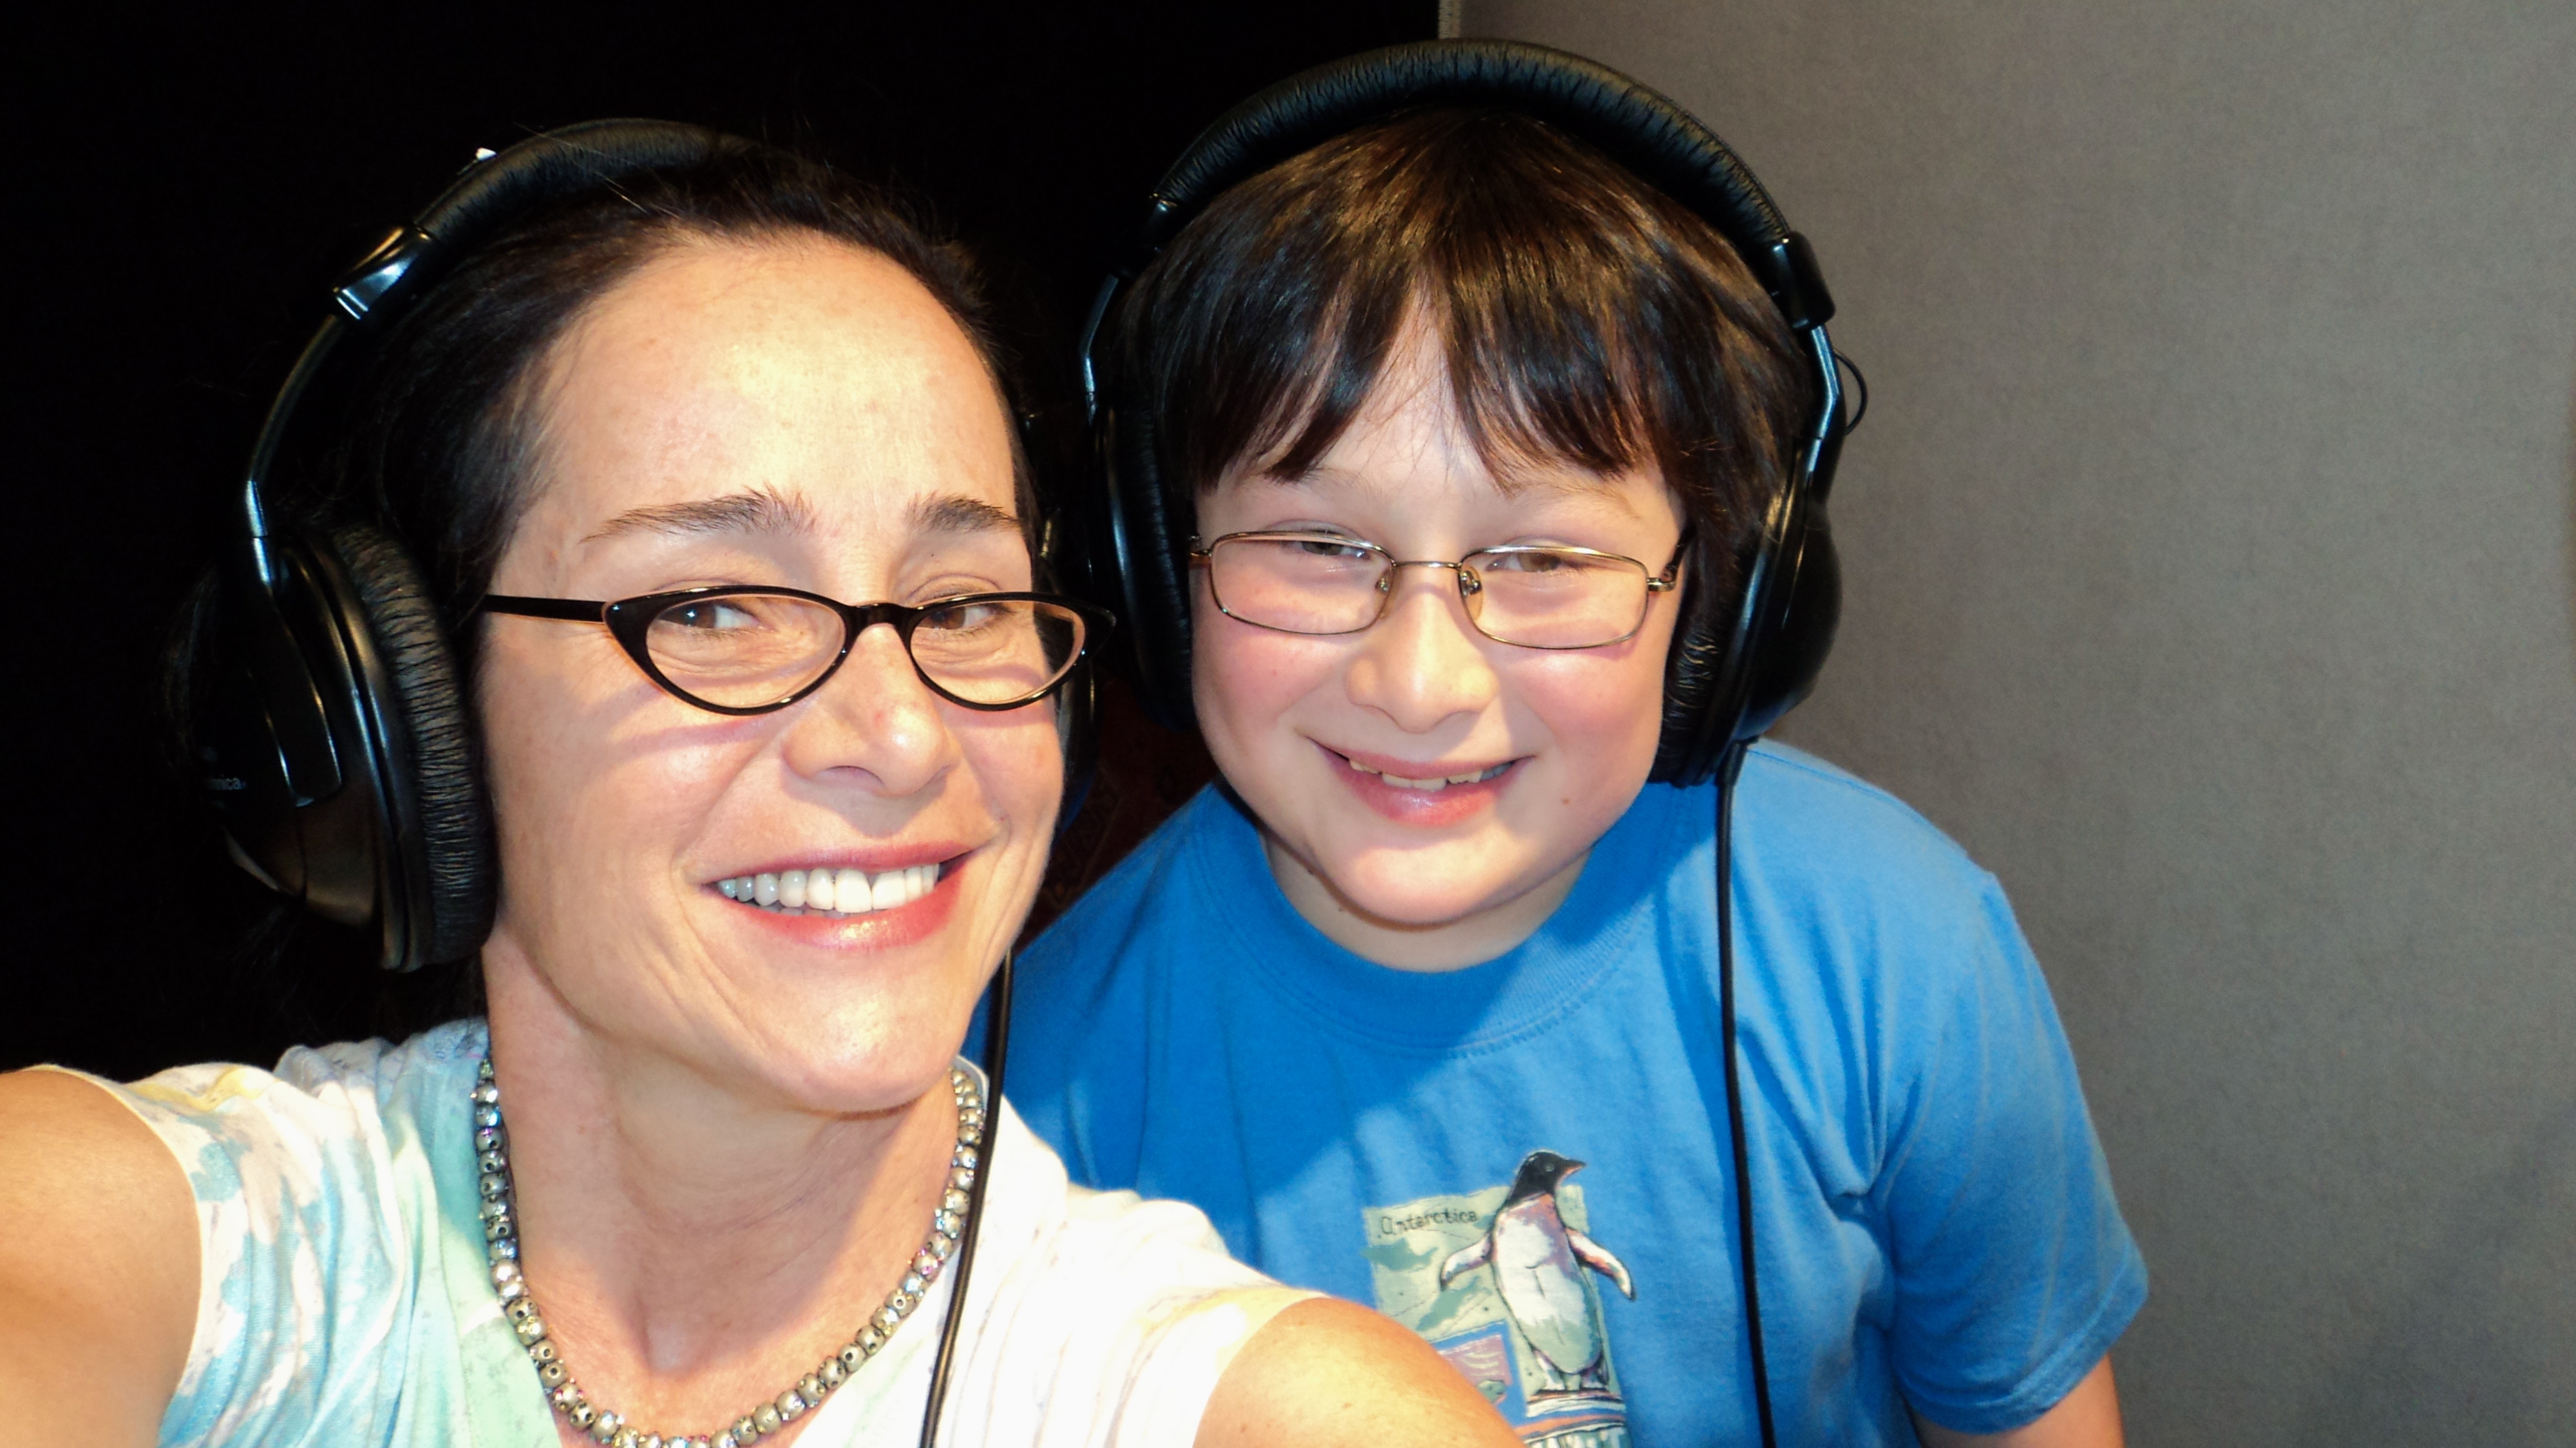 Matthew Jacob Wayne, with voice director, Stevie Vallance, at Salami Studios, in Studio City, CA, working on Matthew's voice over role as 'Little Nutbrown Hare', on Disney Junior's: 